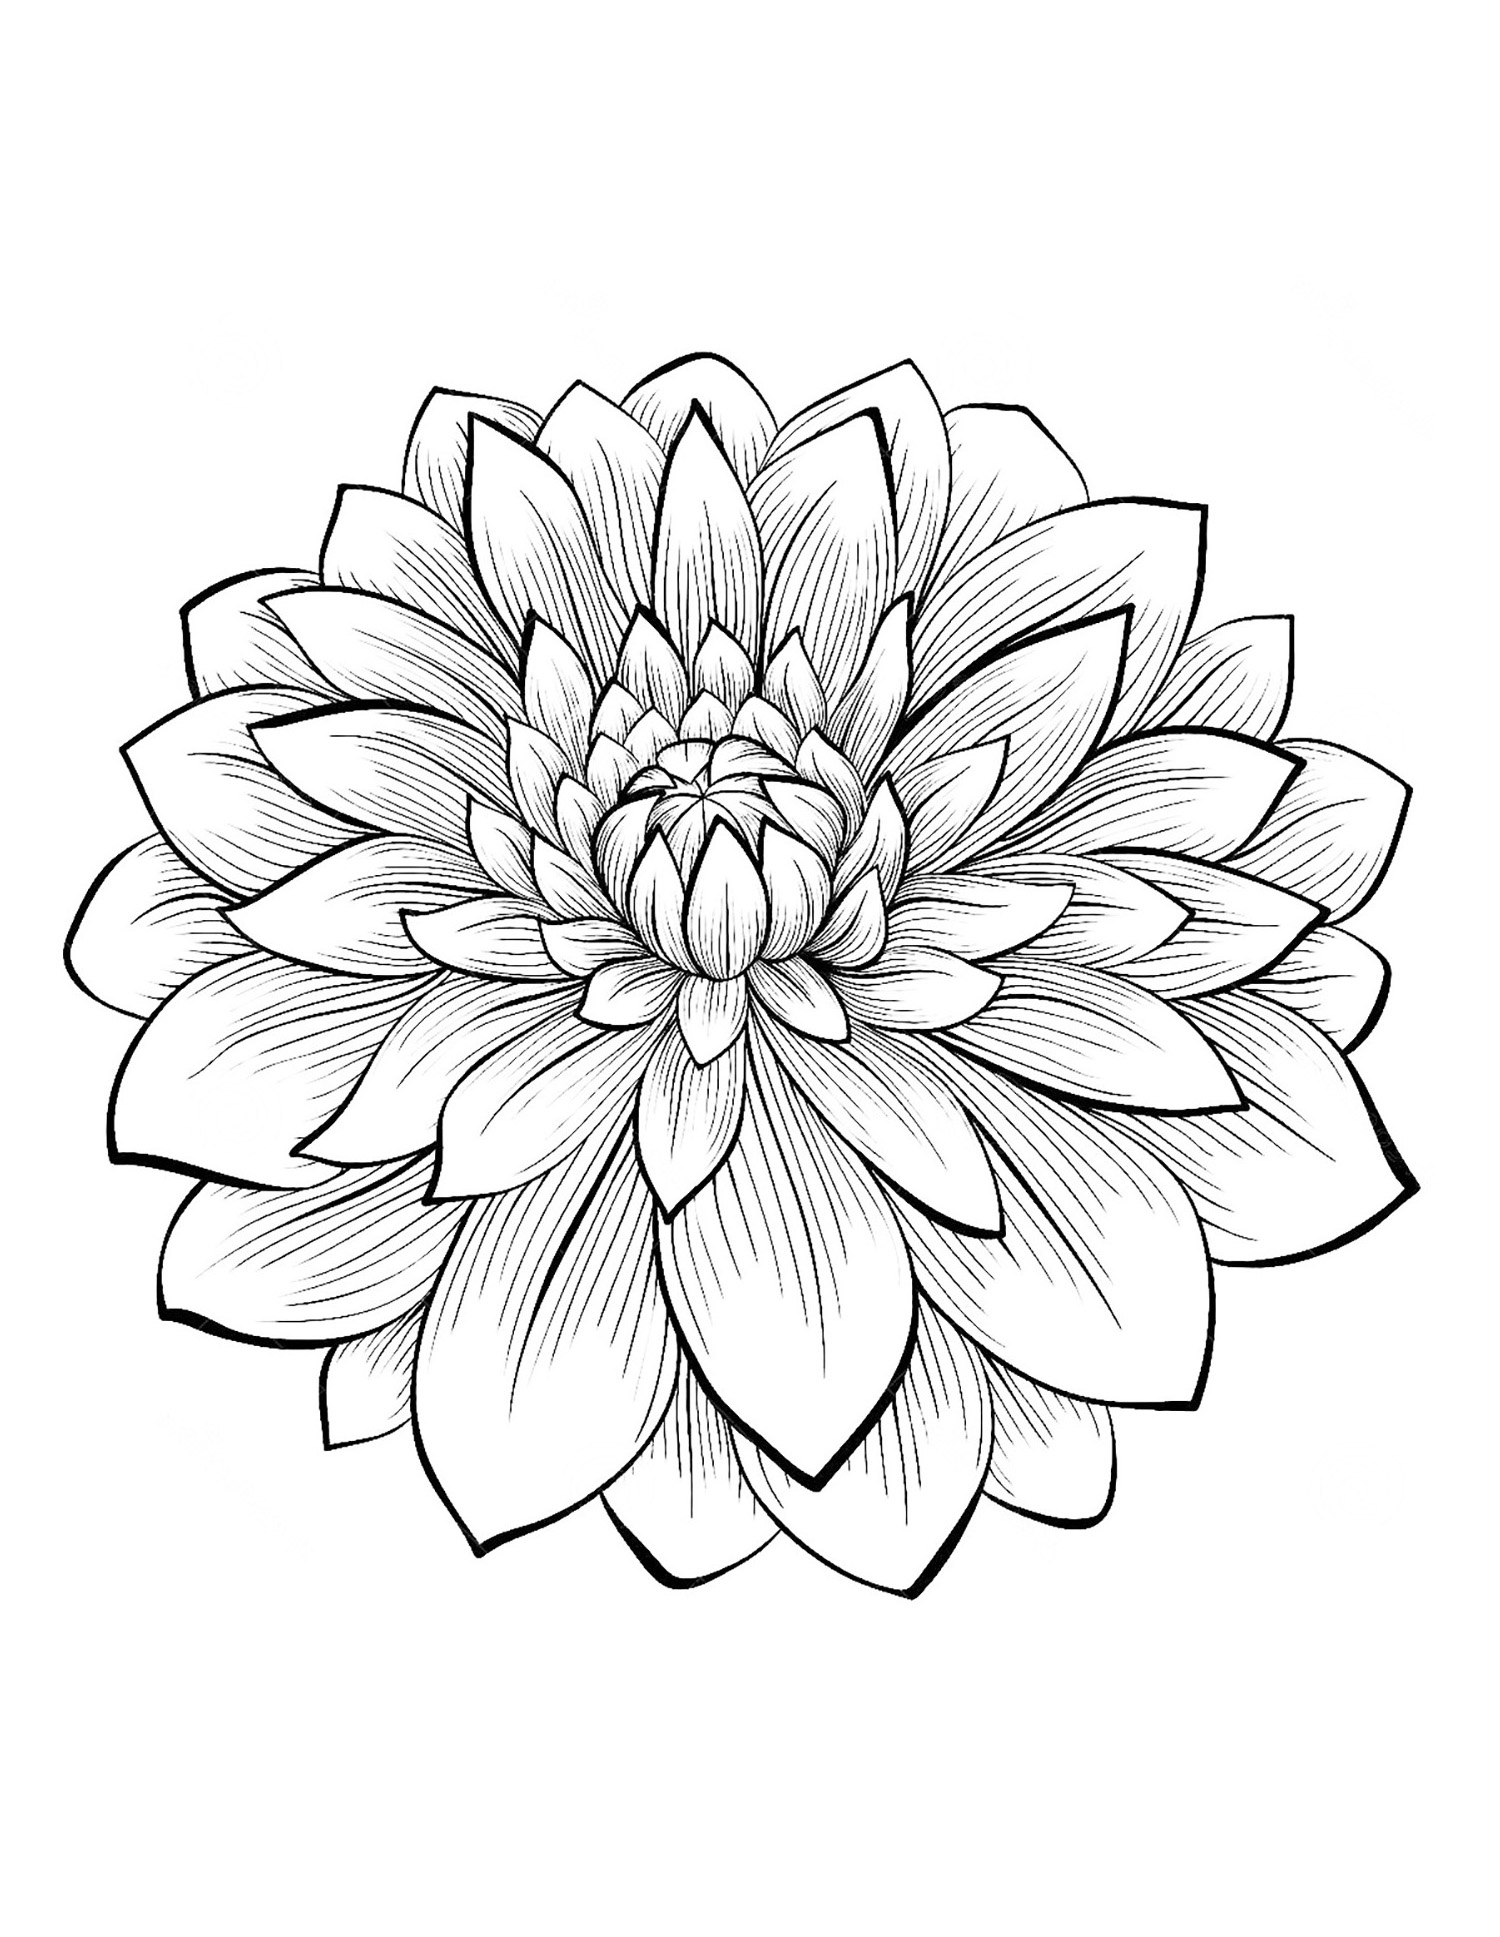 32-printable-flower-coloring-pages-free-pictures-color-pages-collection